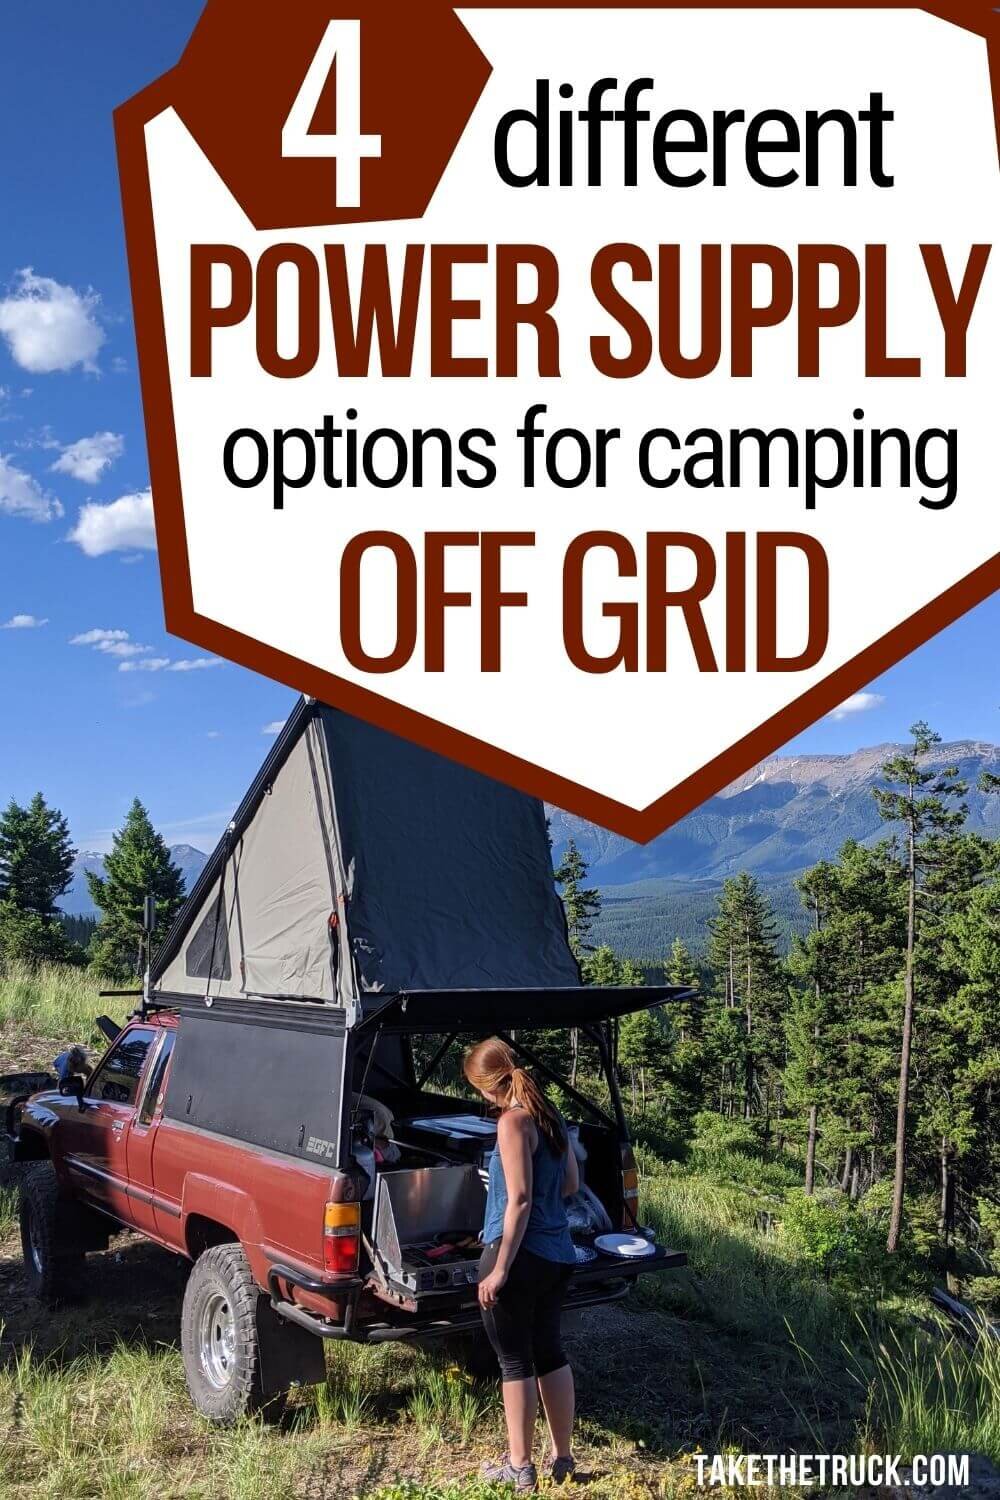 Portable camping power supply is a big choice! This post outlines 4 camping power supply ideas - your vehicle’s battery and inverter, a dual battery setup, or using a solar or gas inverter generator.